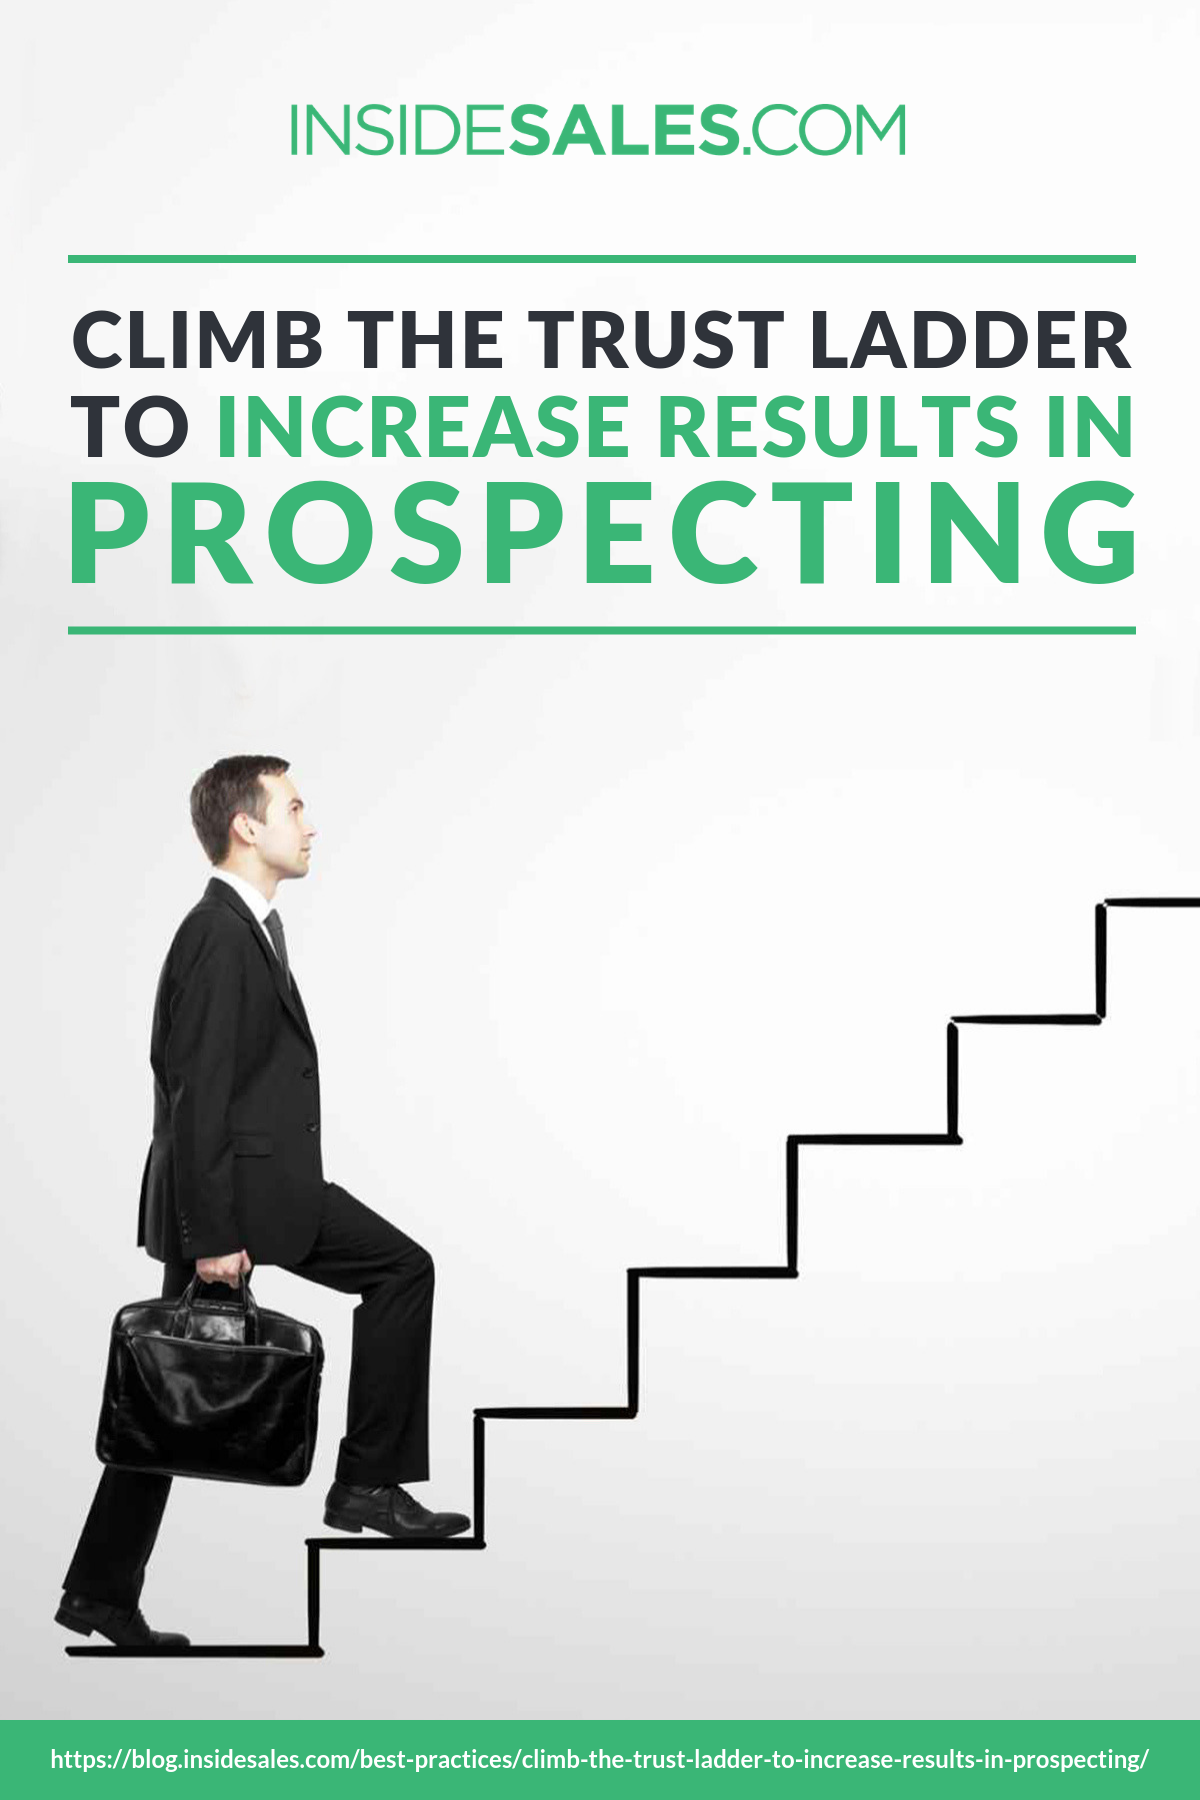 Climb The Trust Ladder To Increase Results In Prospecting https://resources.insidesales.com/blog/best-practices/climb-the-trust-ladder-to-increase-results-in-prospecting/